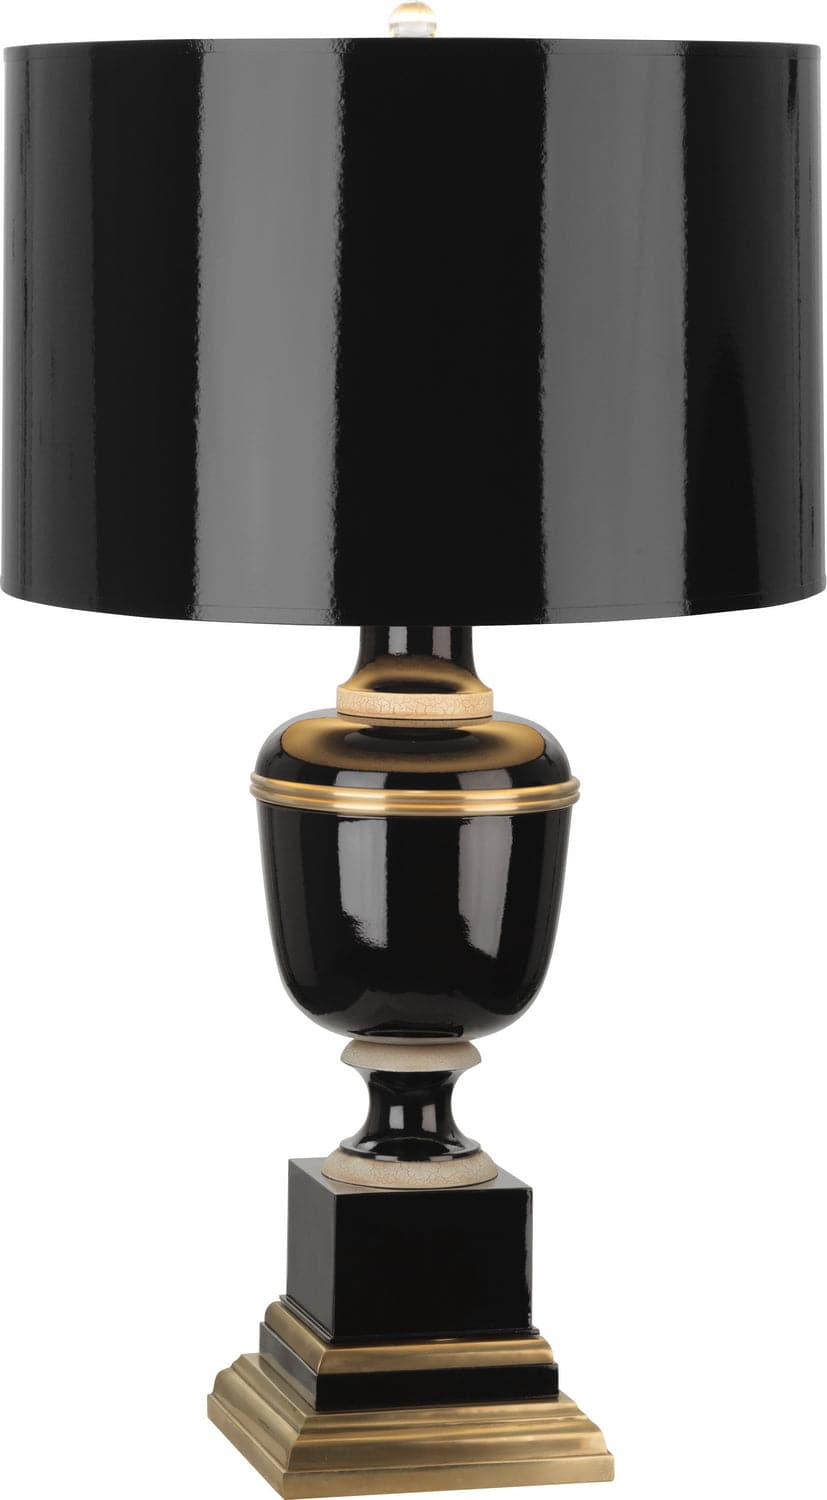 Robert Abbey - 2507 - One Light Accent Lamp - Annika - Black Lacquered Paint w/Natural Brass and Ivory Crackle